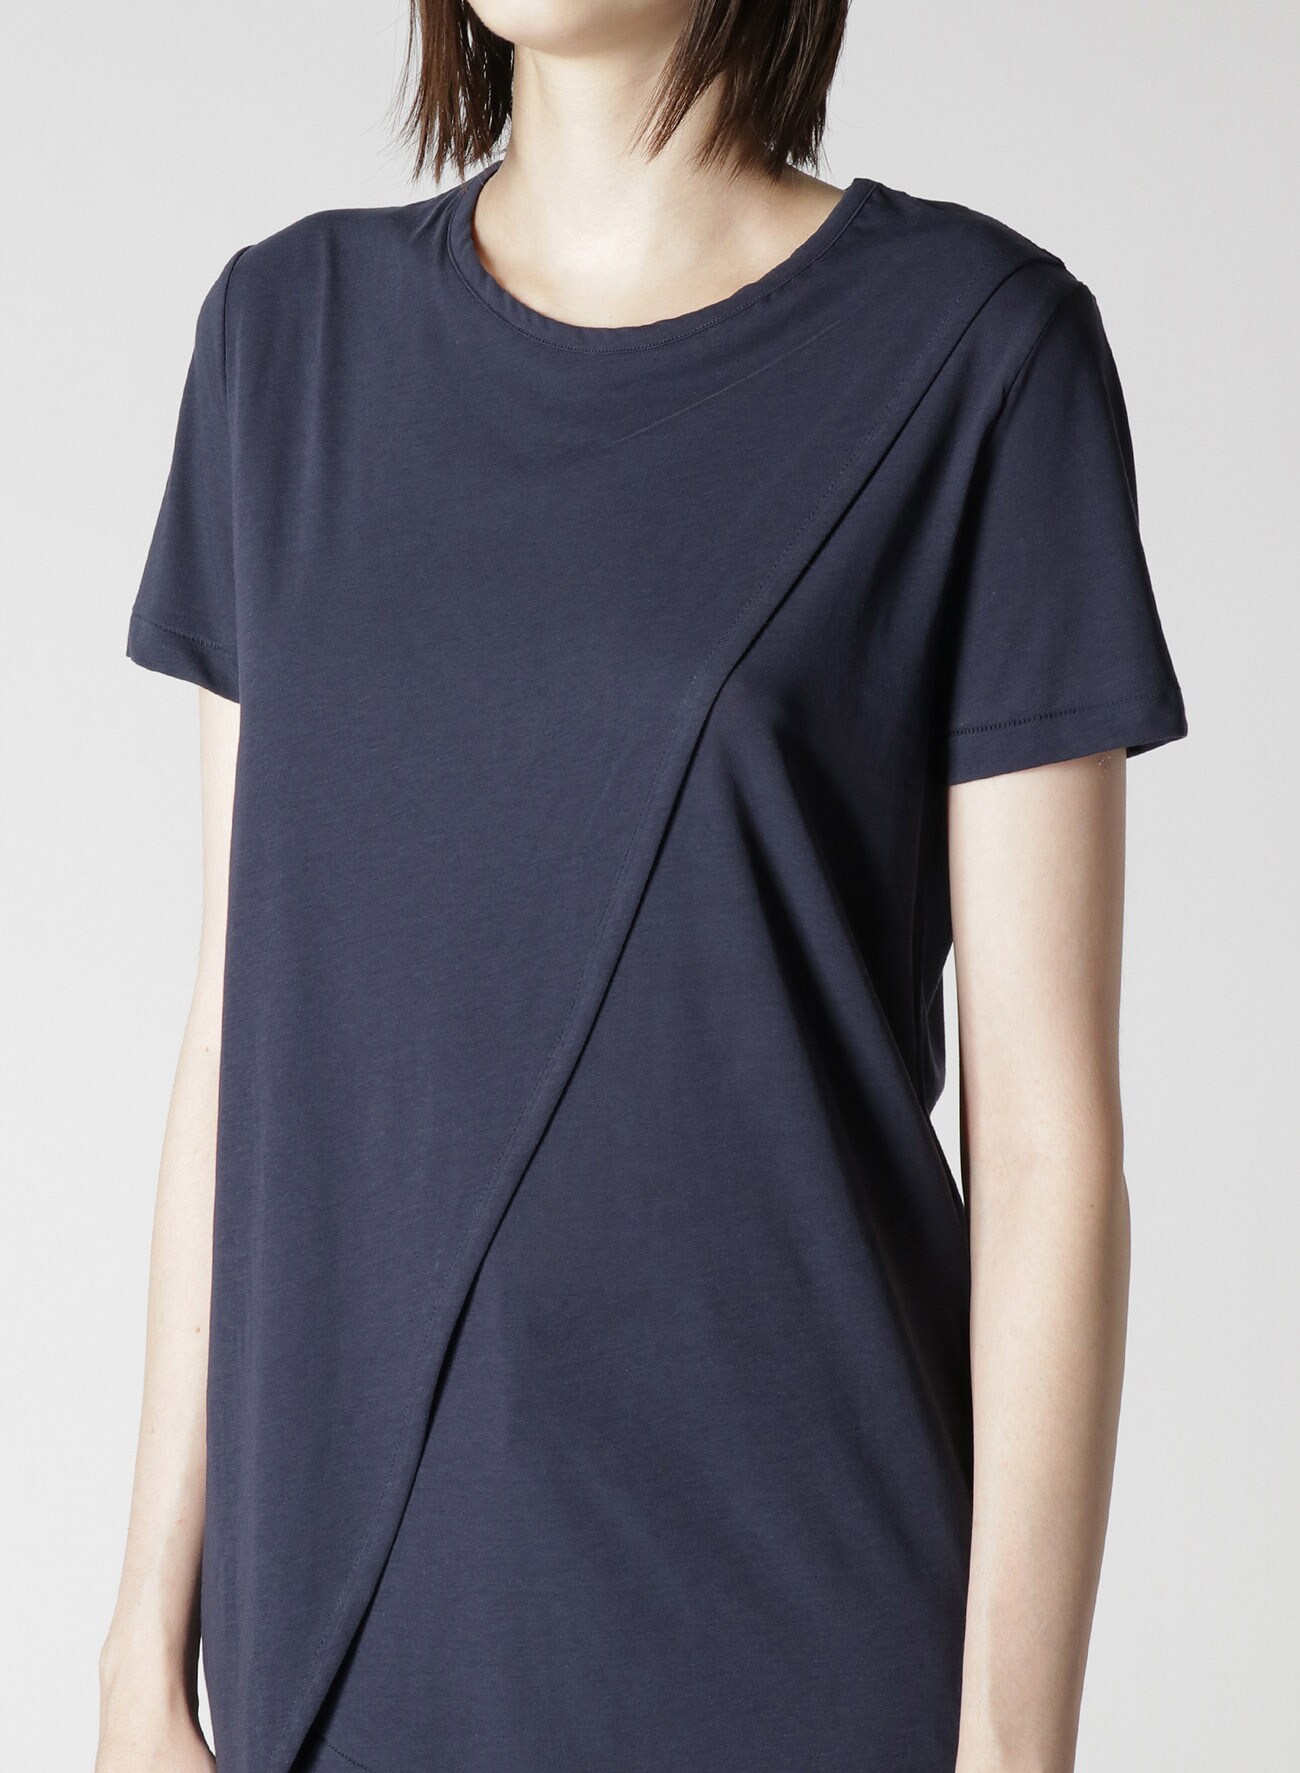 SINGLE JERSEY T-SHIRT WITH DIAGONAL OVERLAPPING PANEL